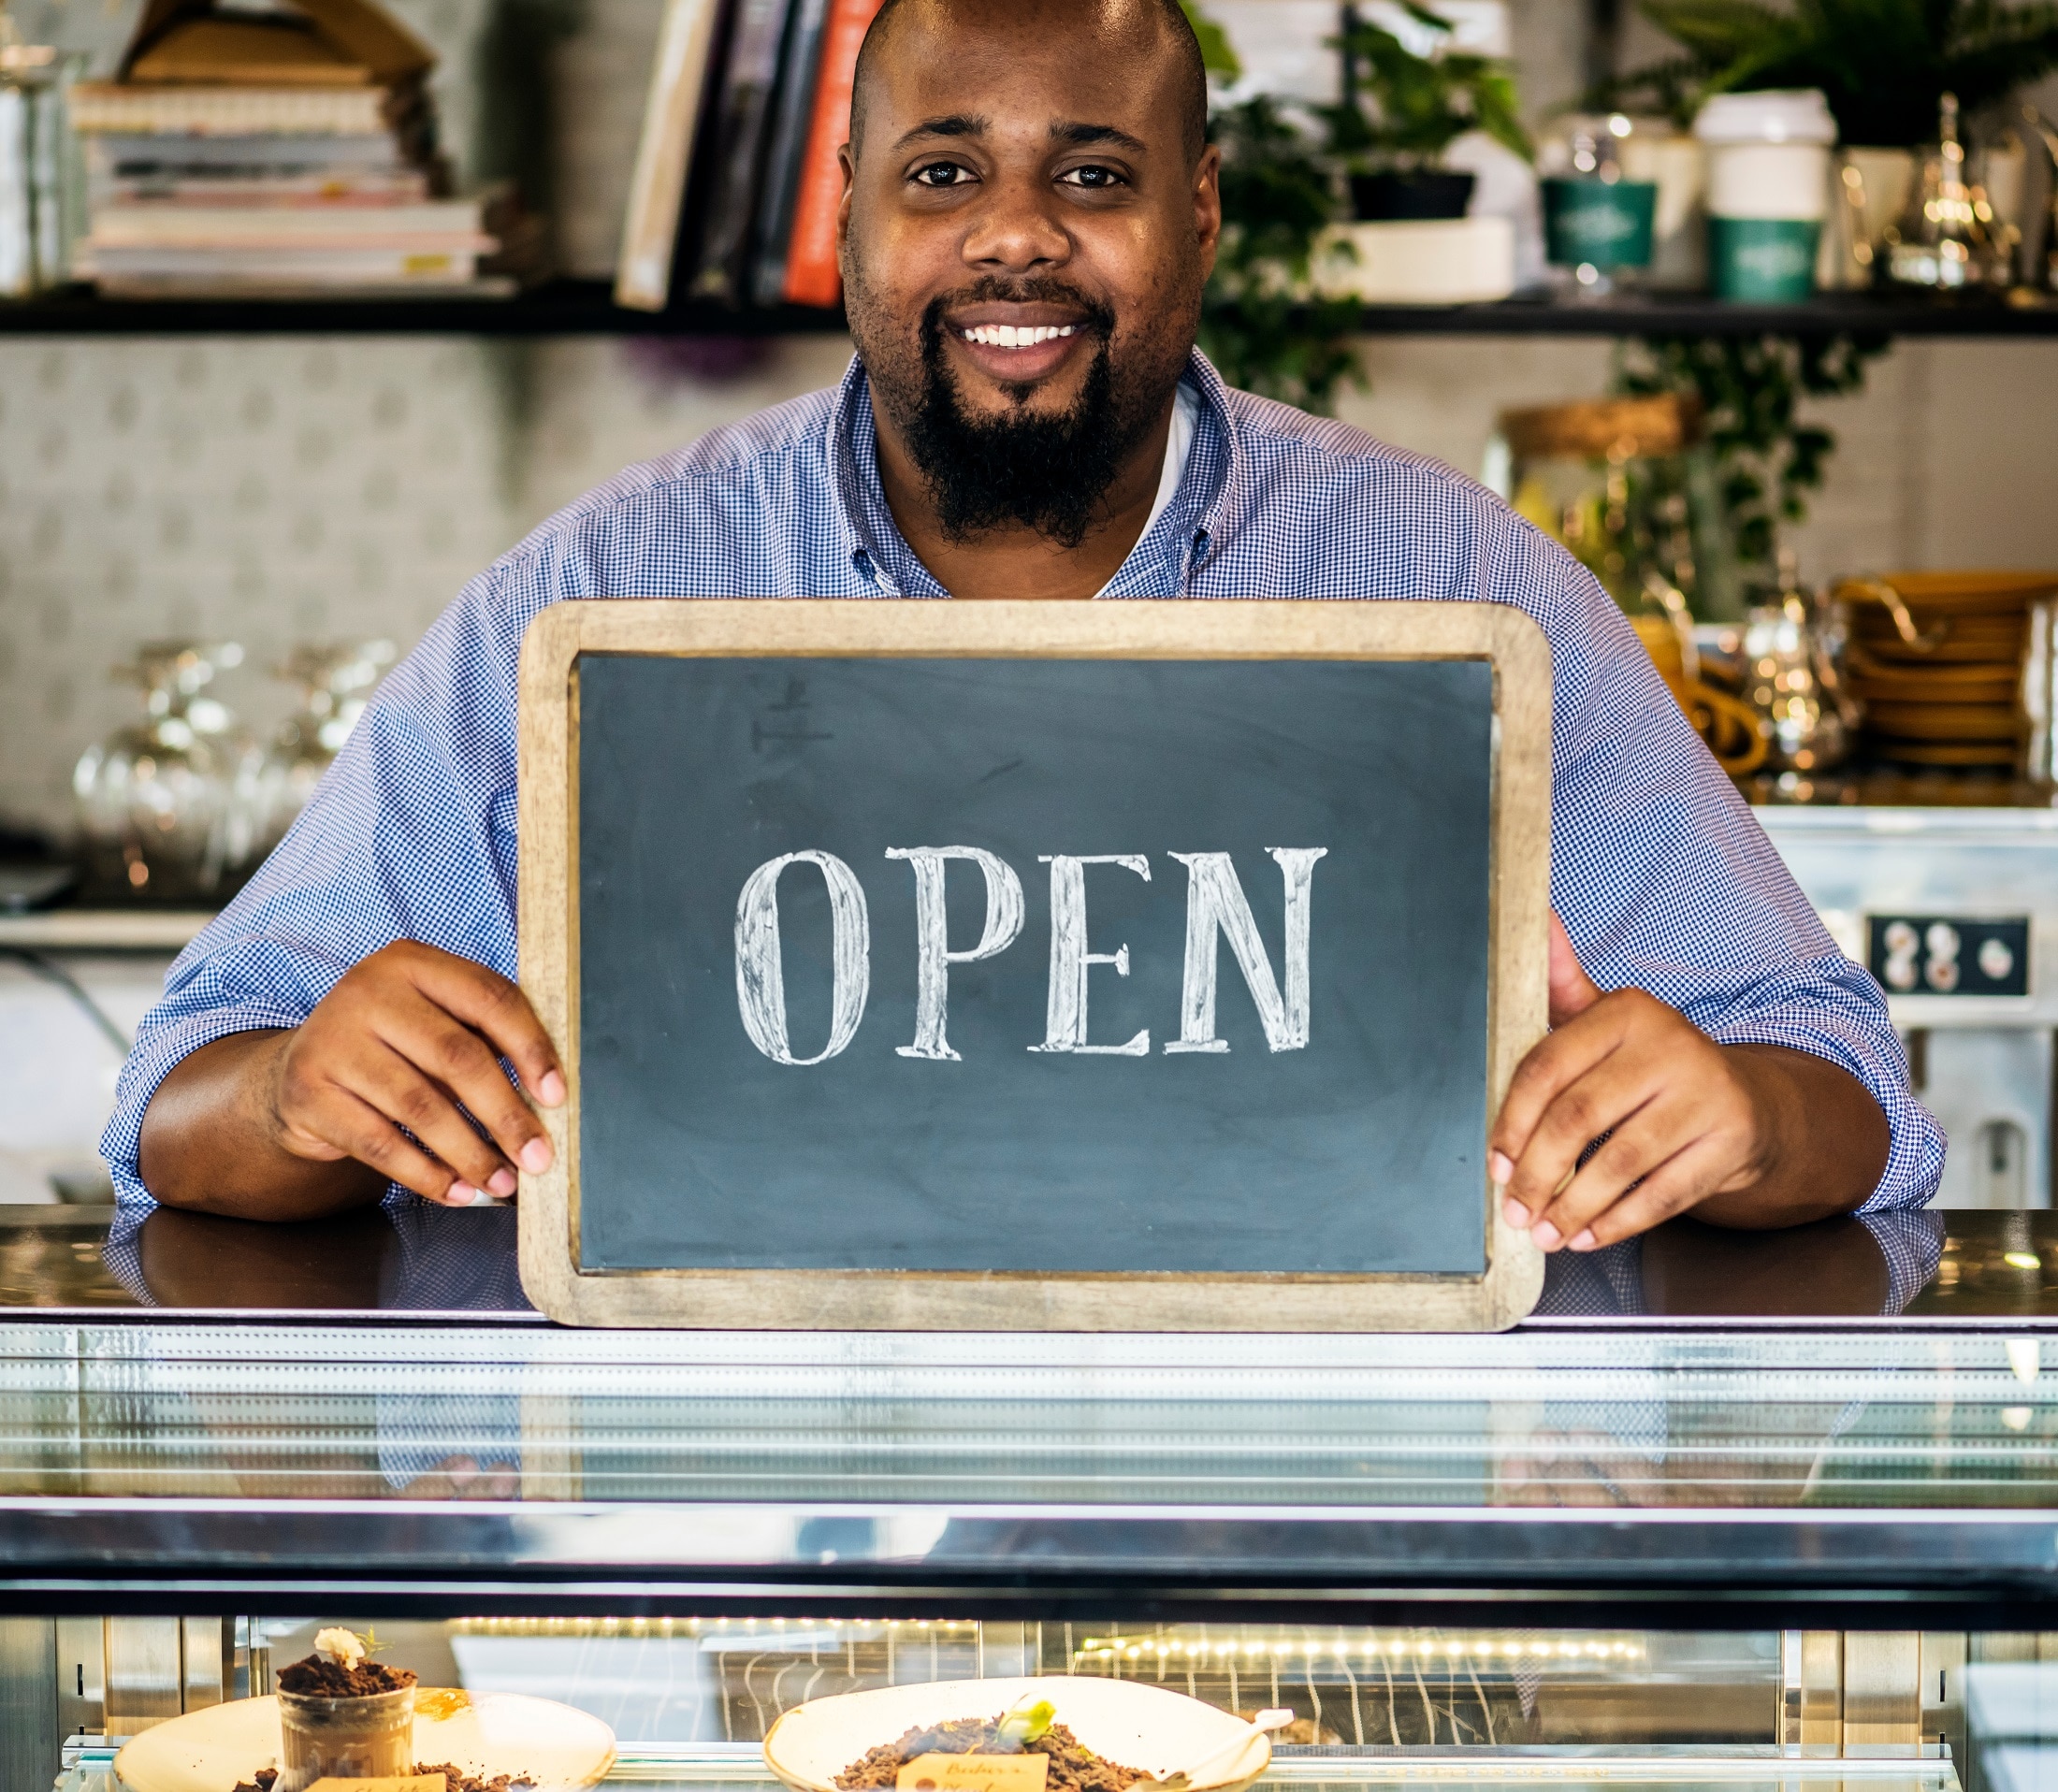 Food Shop Owner Holding Up Open Sign Indicating He's Open For Business